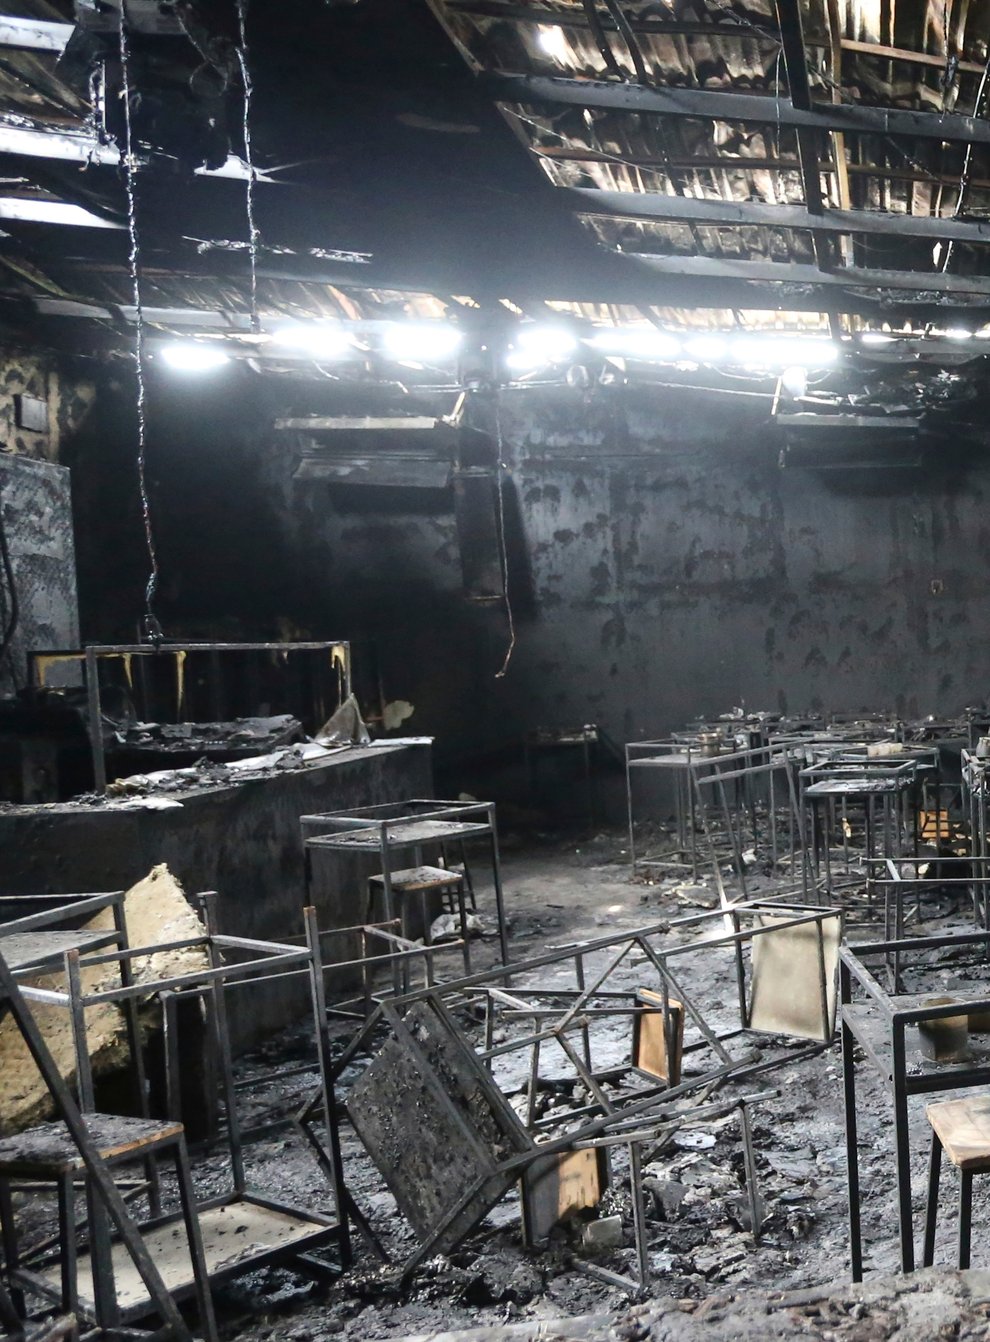 Major fire damage fills the interior at the Mountain B pub in the Sattahip district of Chonburi province (AP)